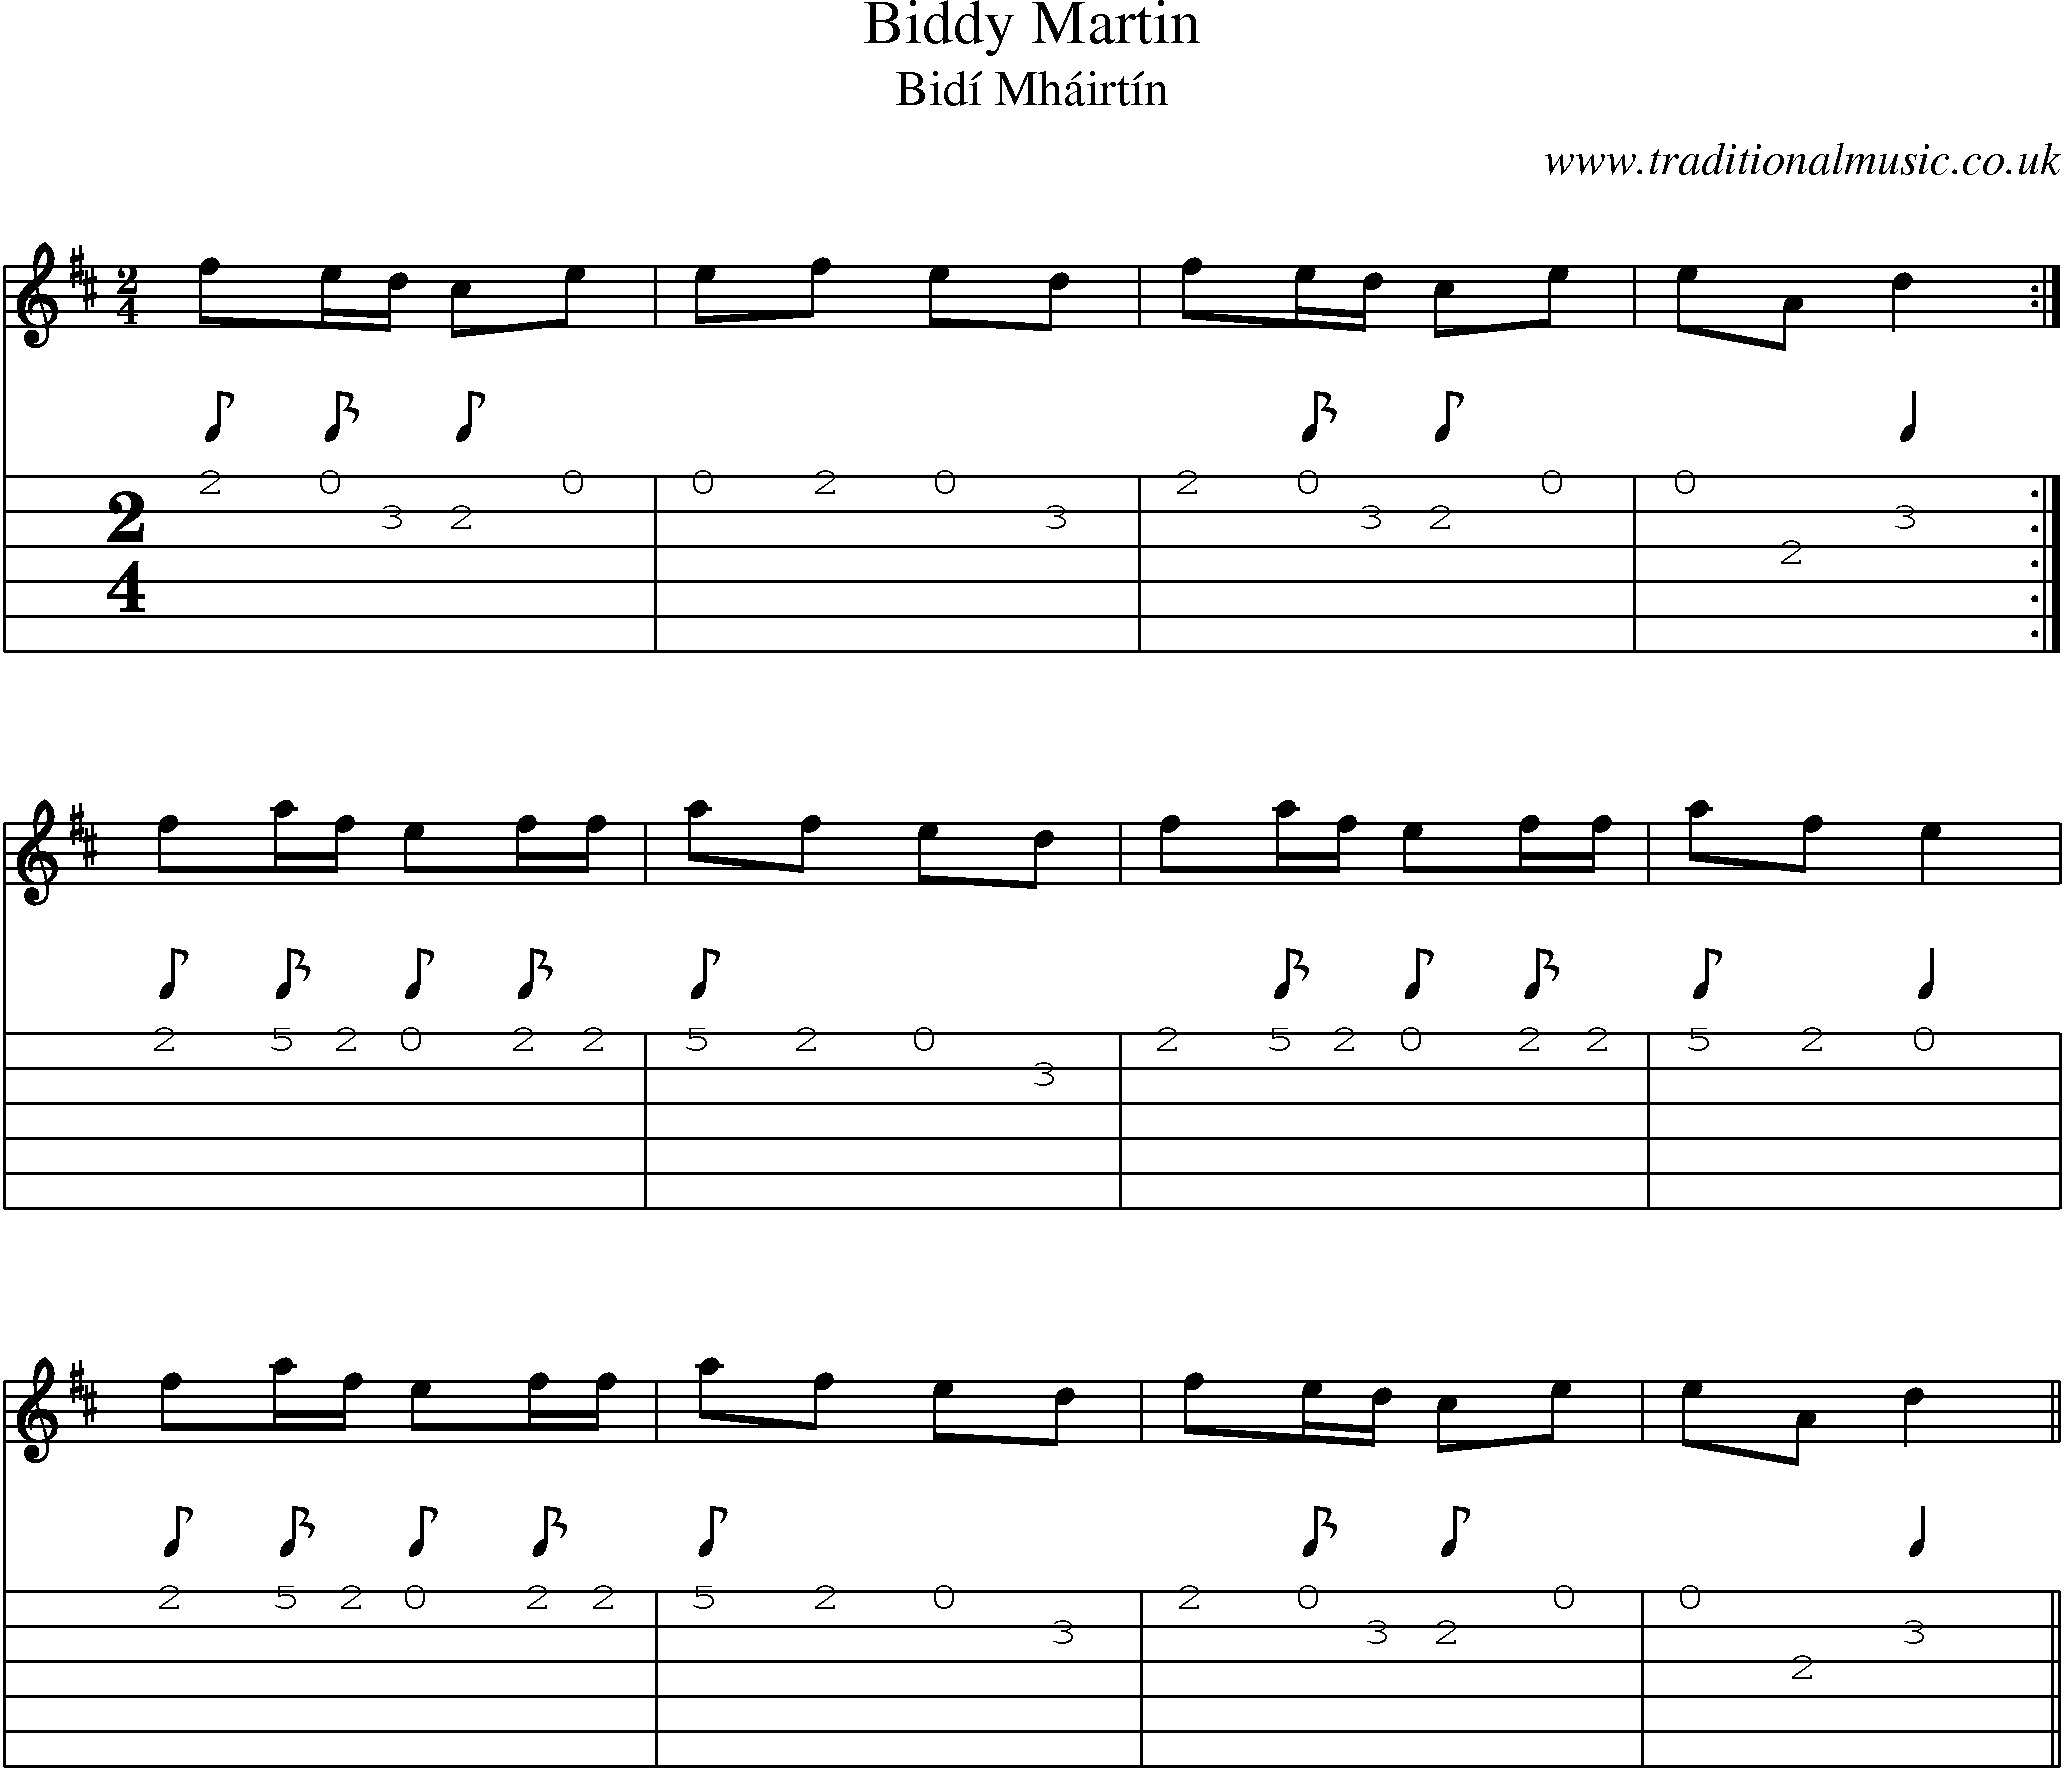 Music Score and Guitar Tabs for Biddy Martin